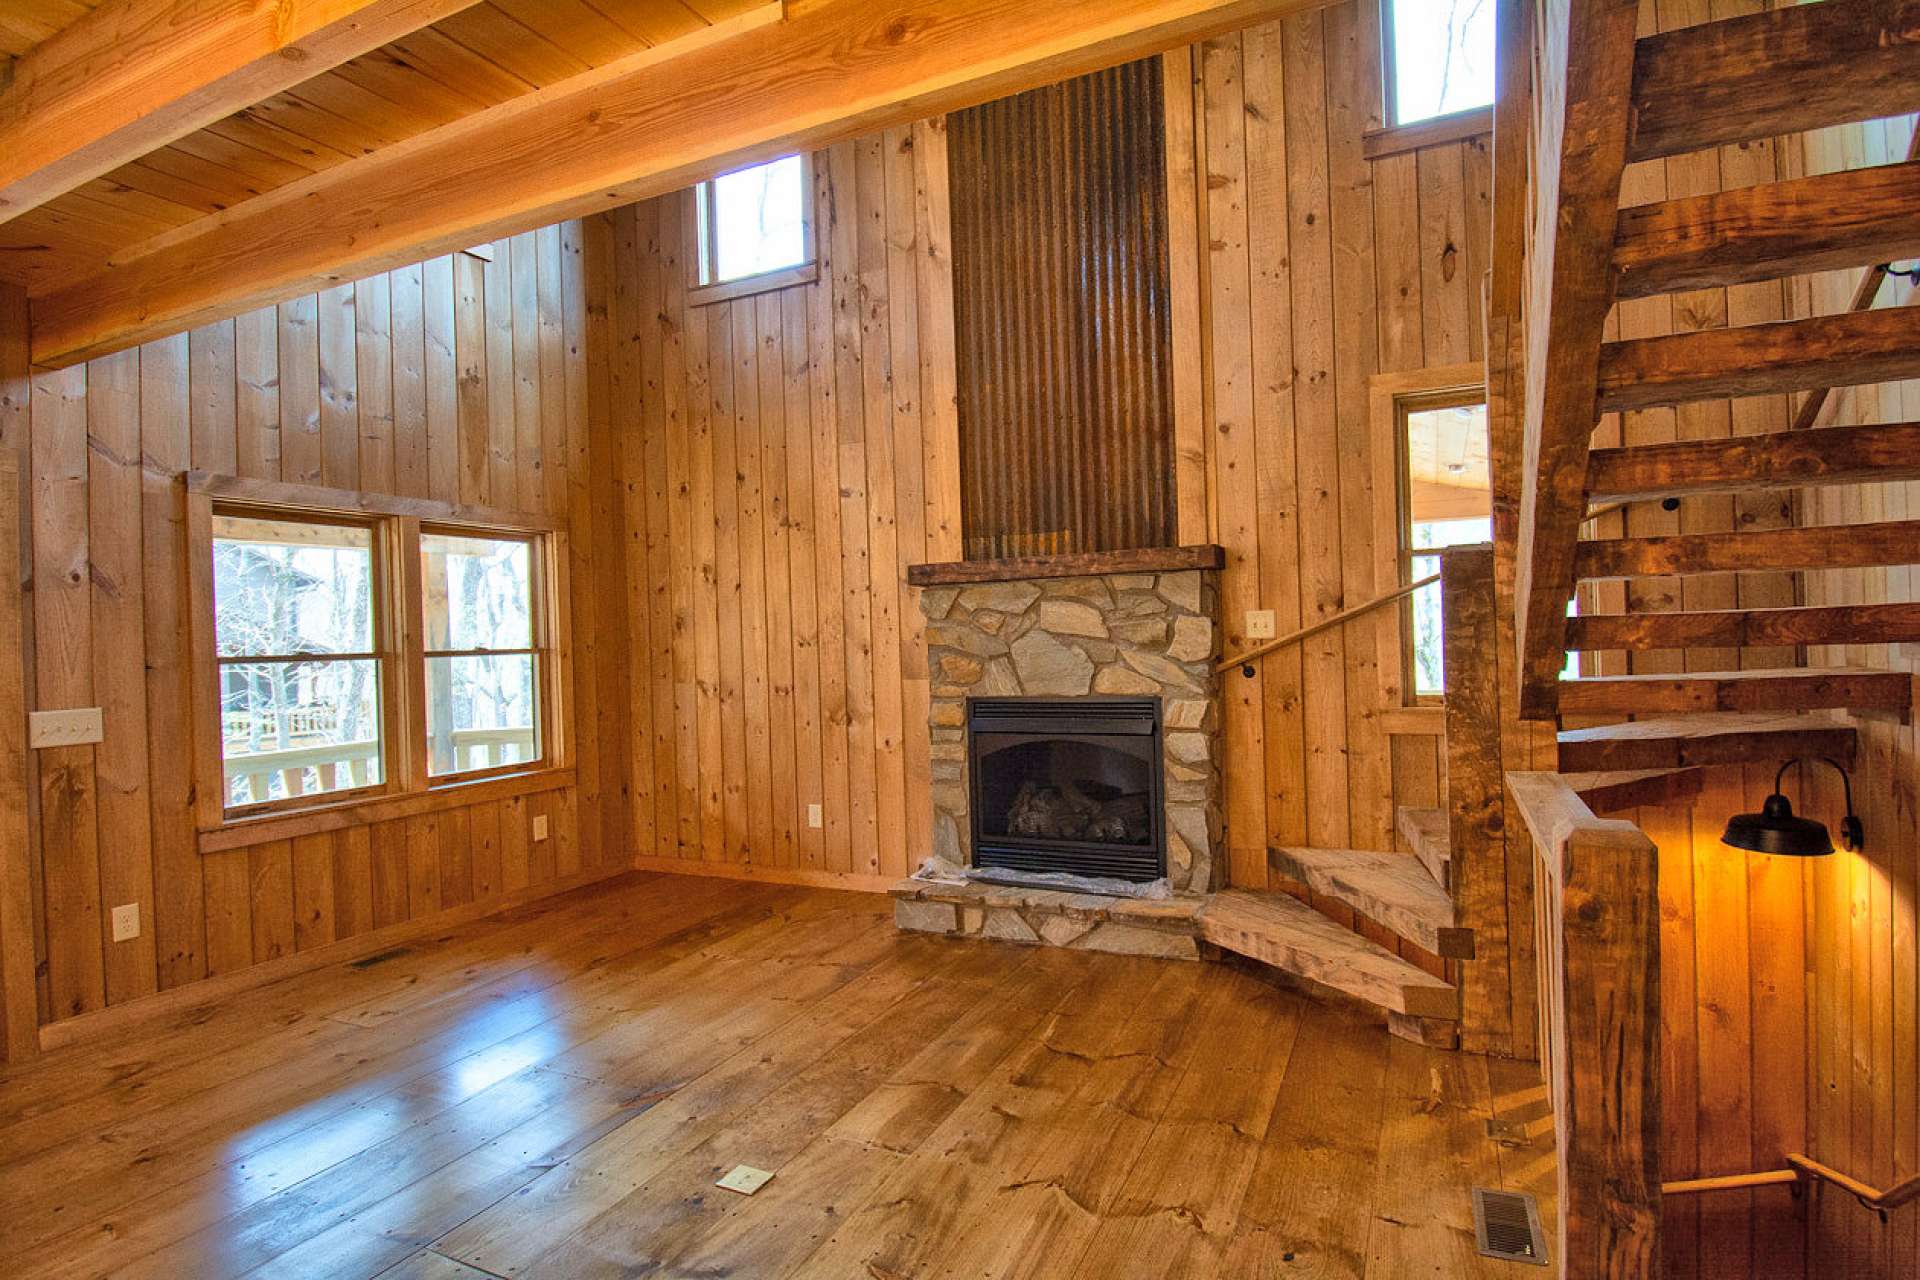 The vaulted great room greets with gleaming wood floors, lots of windows, and a fireplace with gas logs.